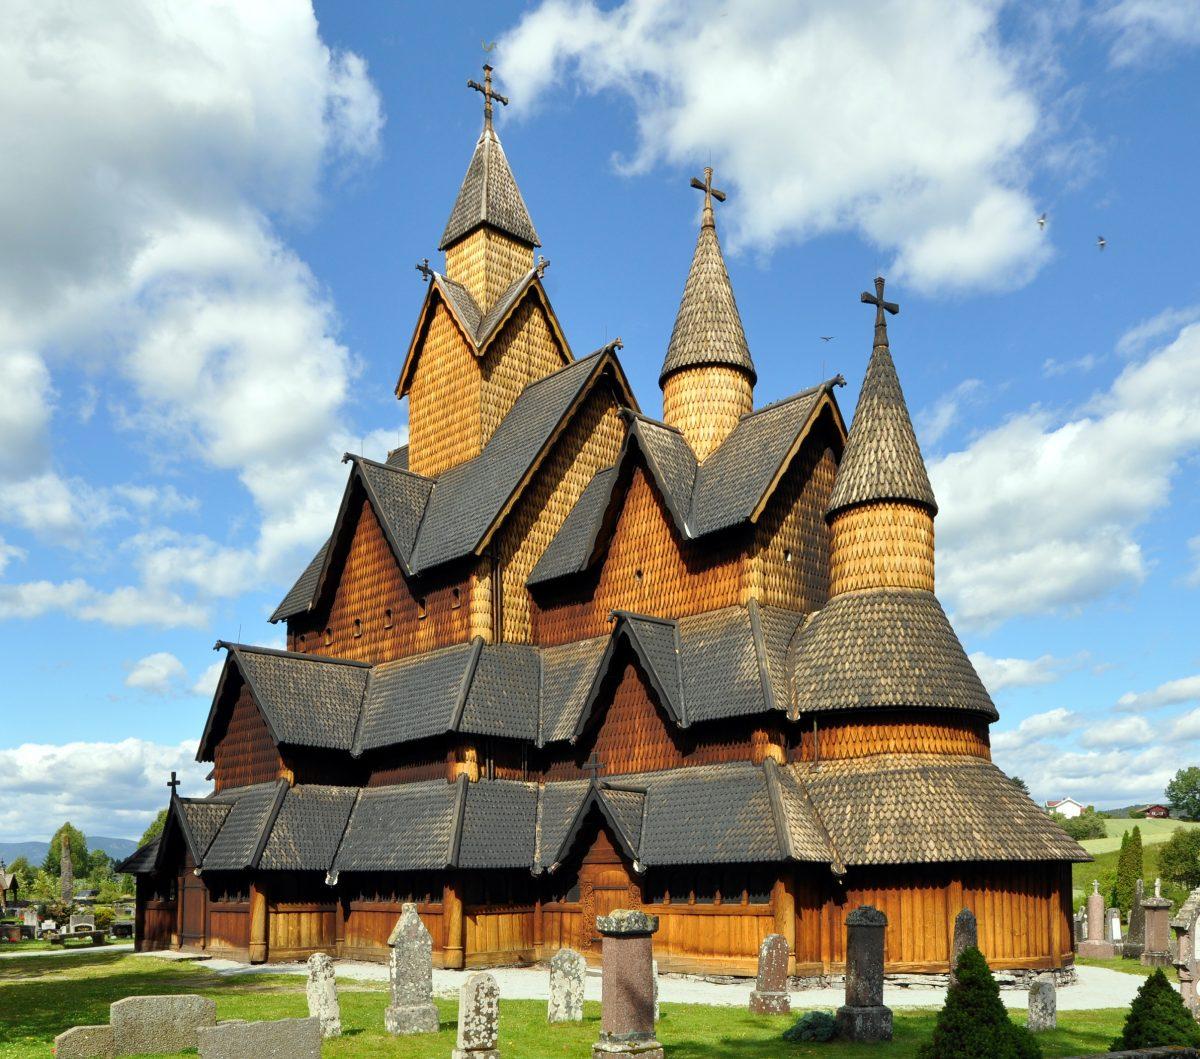 Faith was central to Sigrid Undset’s character Kristin Lavransdatter. The Heddal Stave Church, built in 13th-century Norway. (Micha L. Rieser)